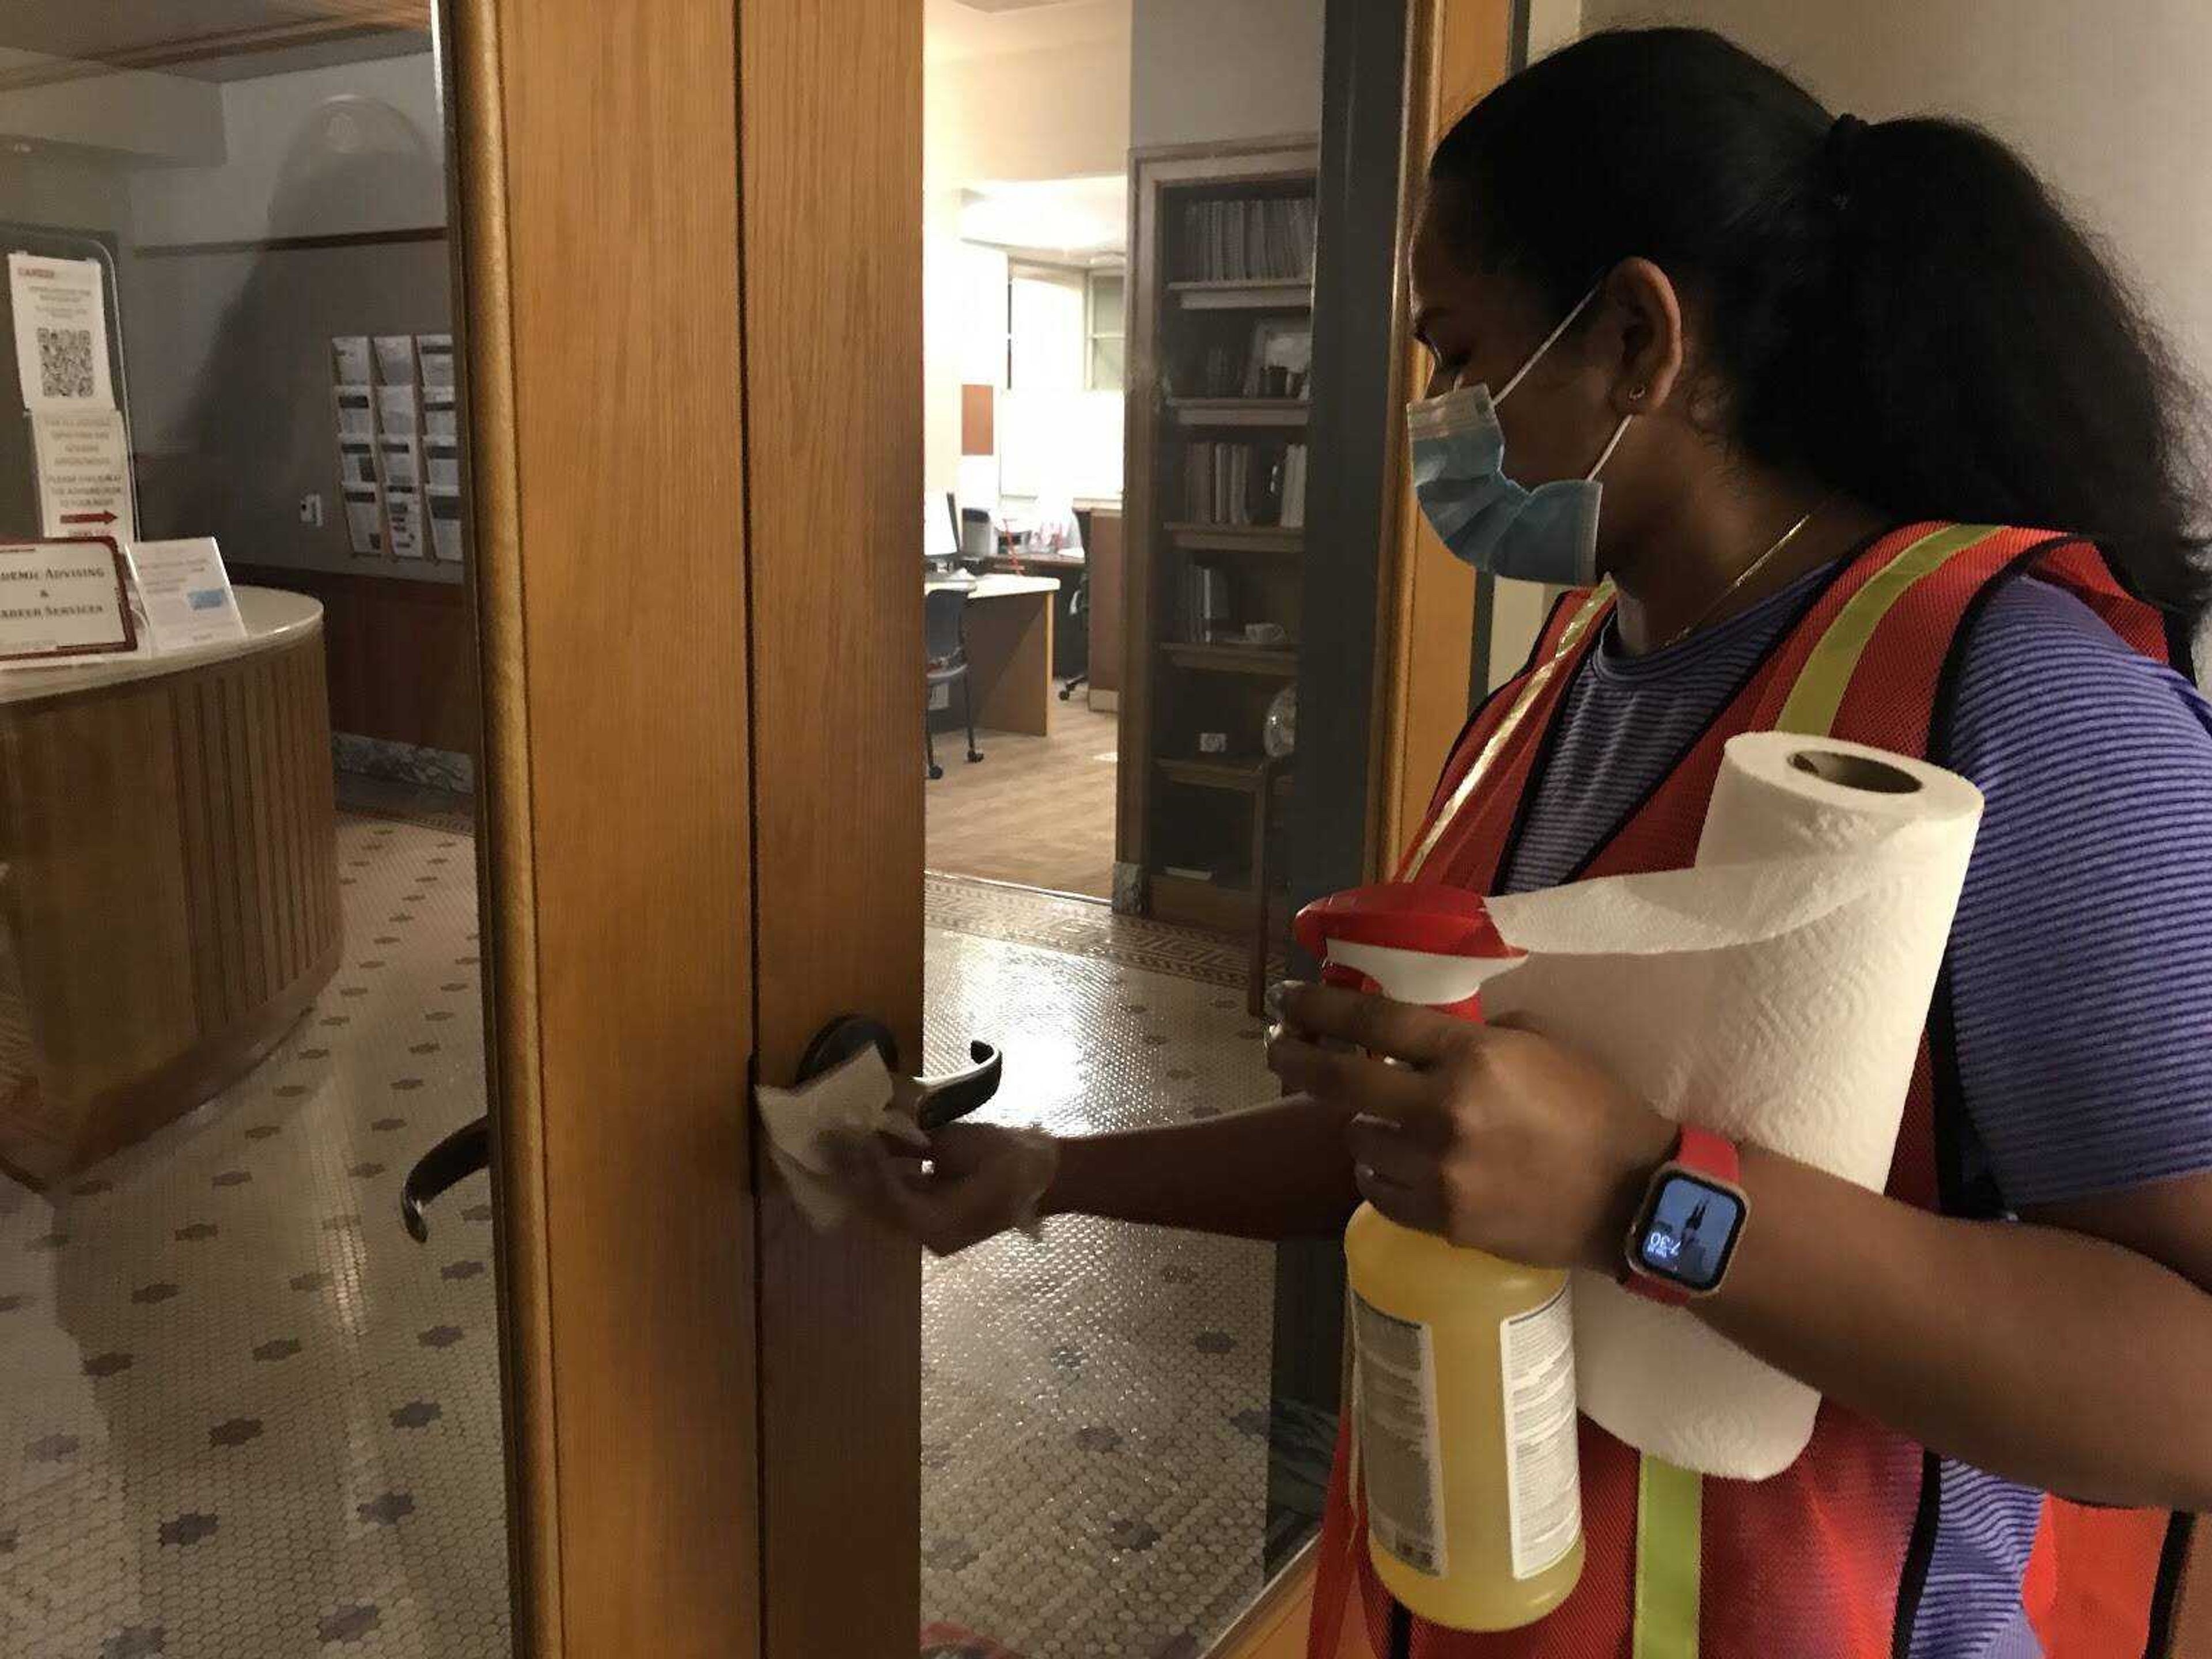 Computer science major Aruna Kamma disinfects the entryway to the Registrar’s office in Academic Hall.